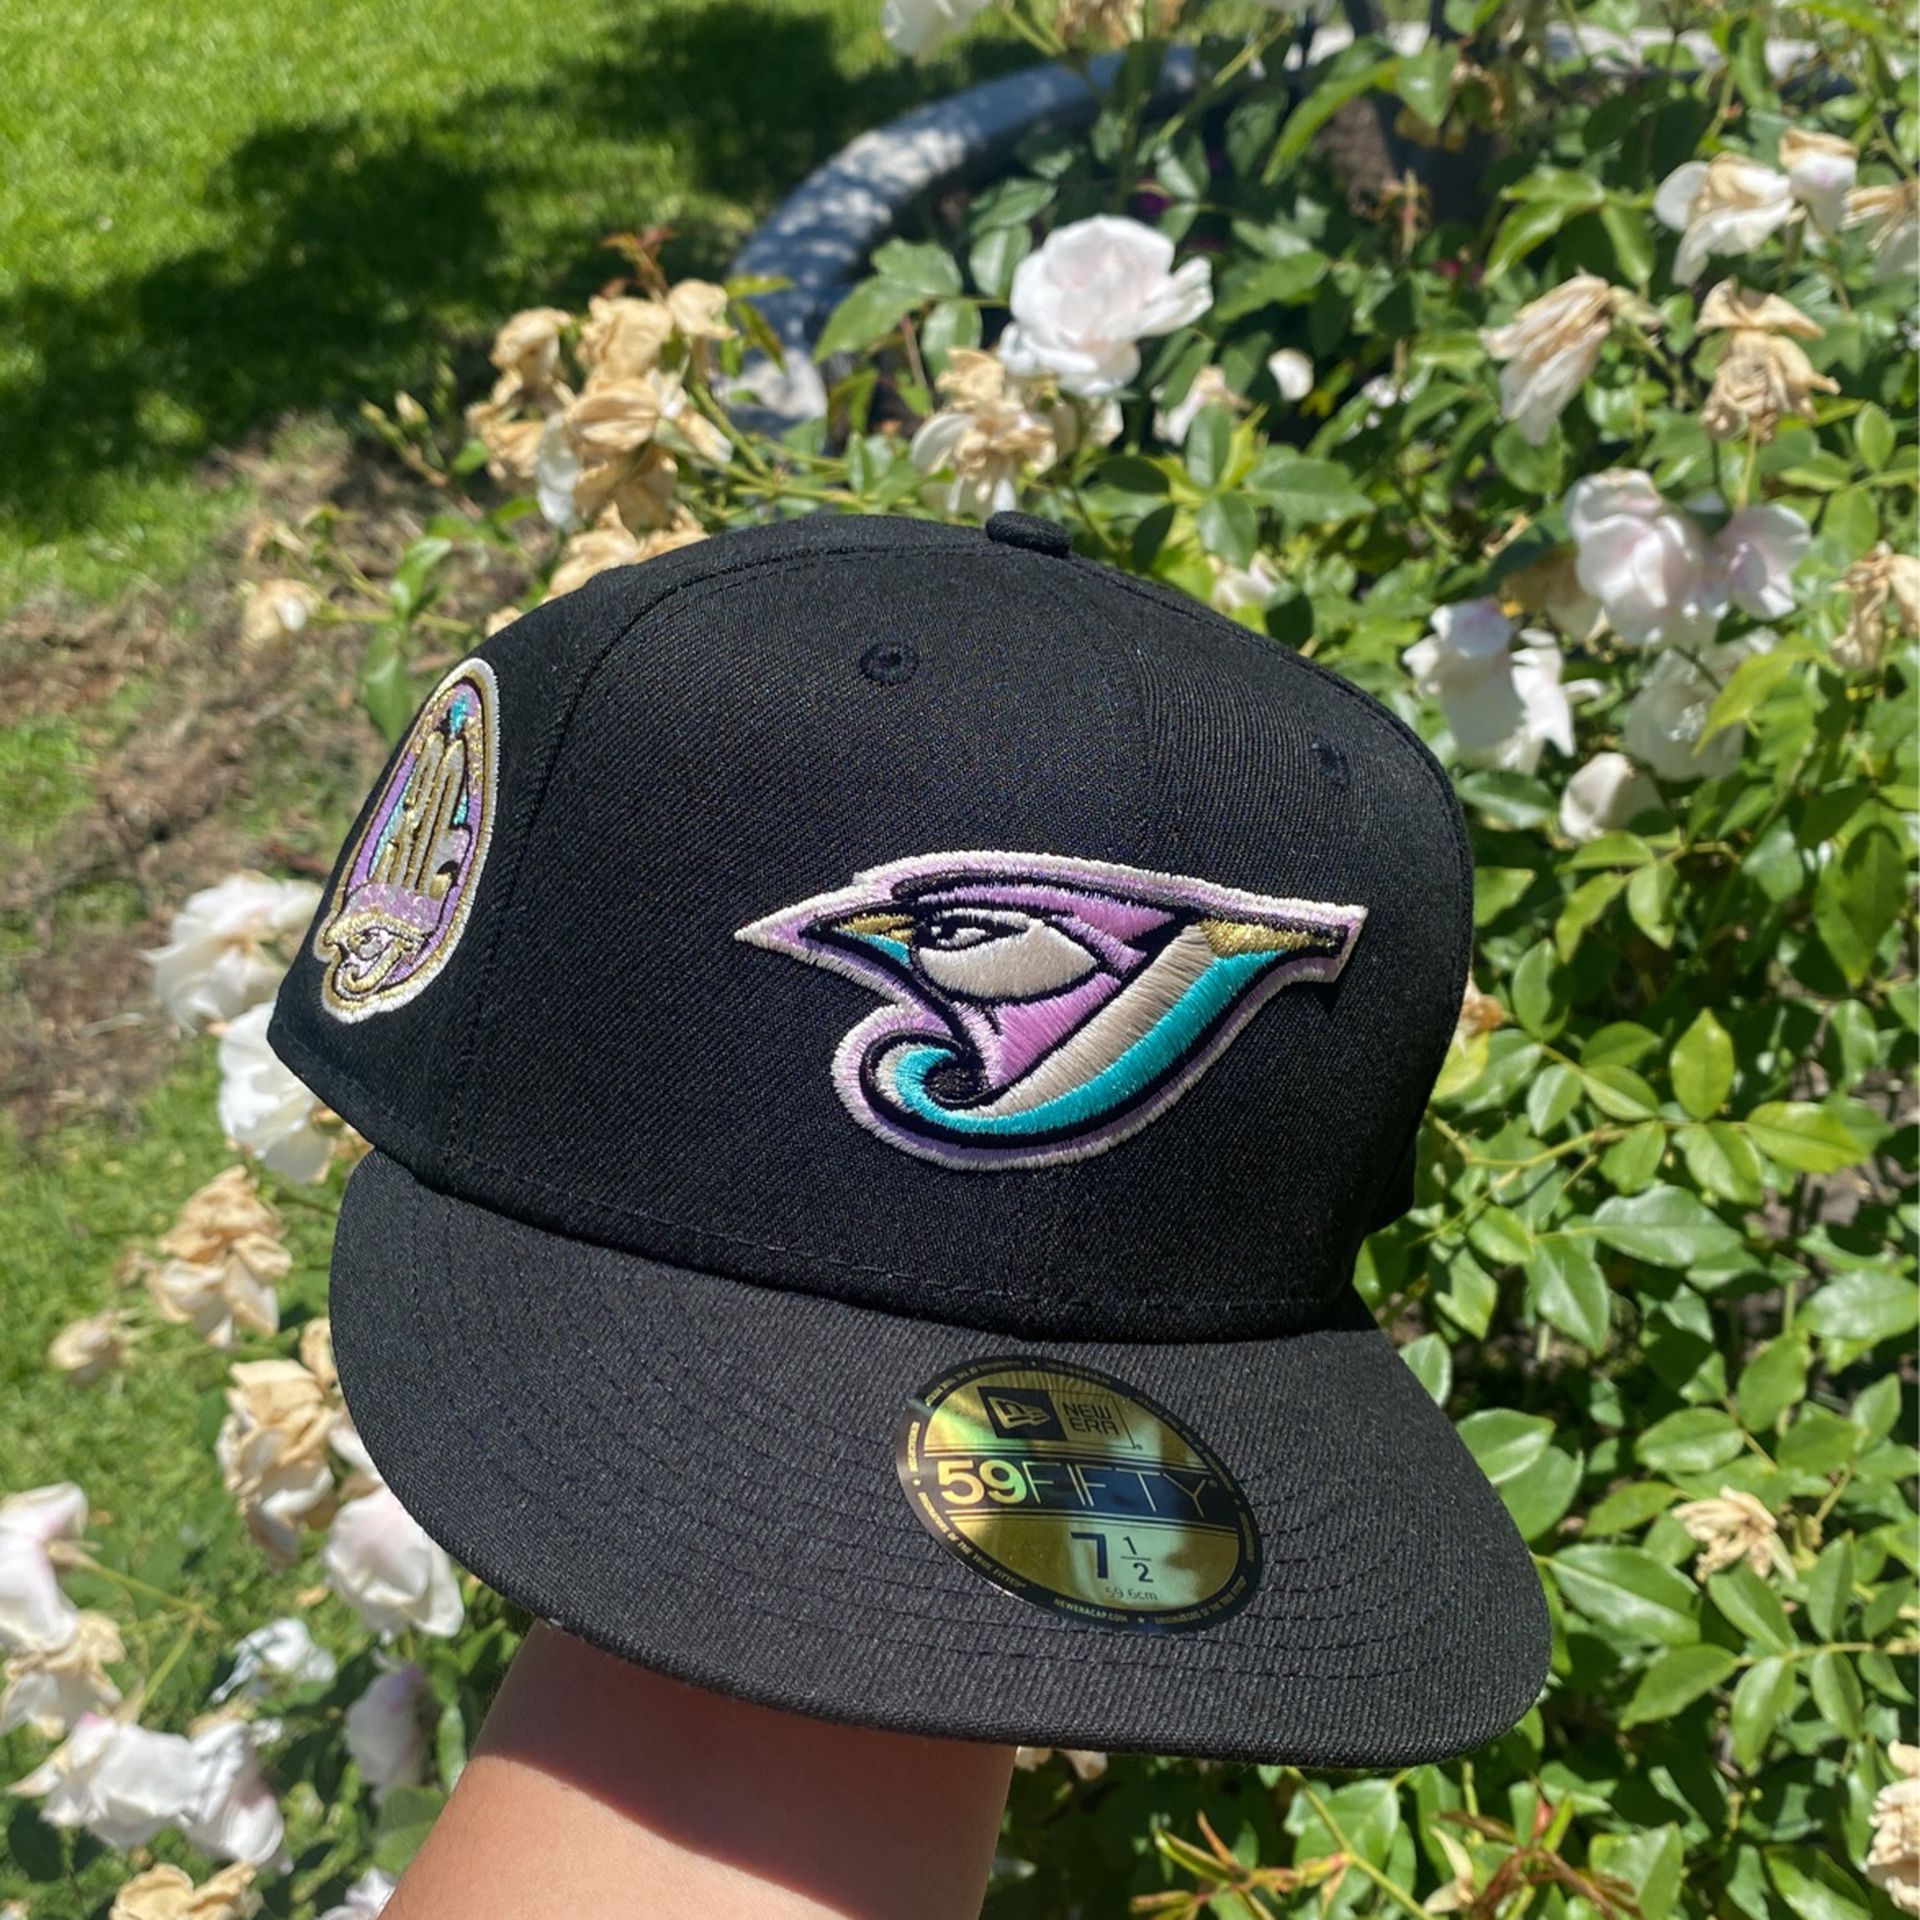 Black Blue Jays Fitted for Sale in South Gate, CA - OfferUp